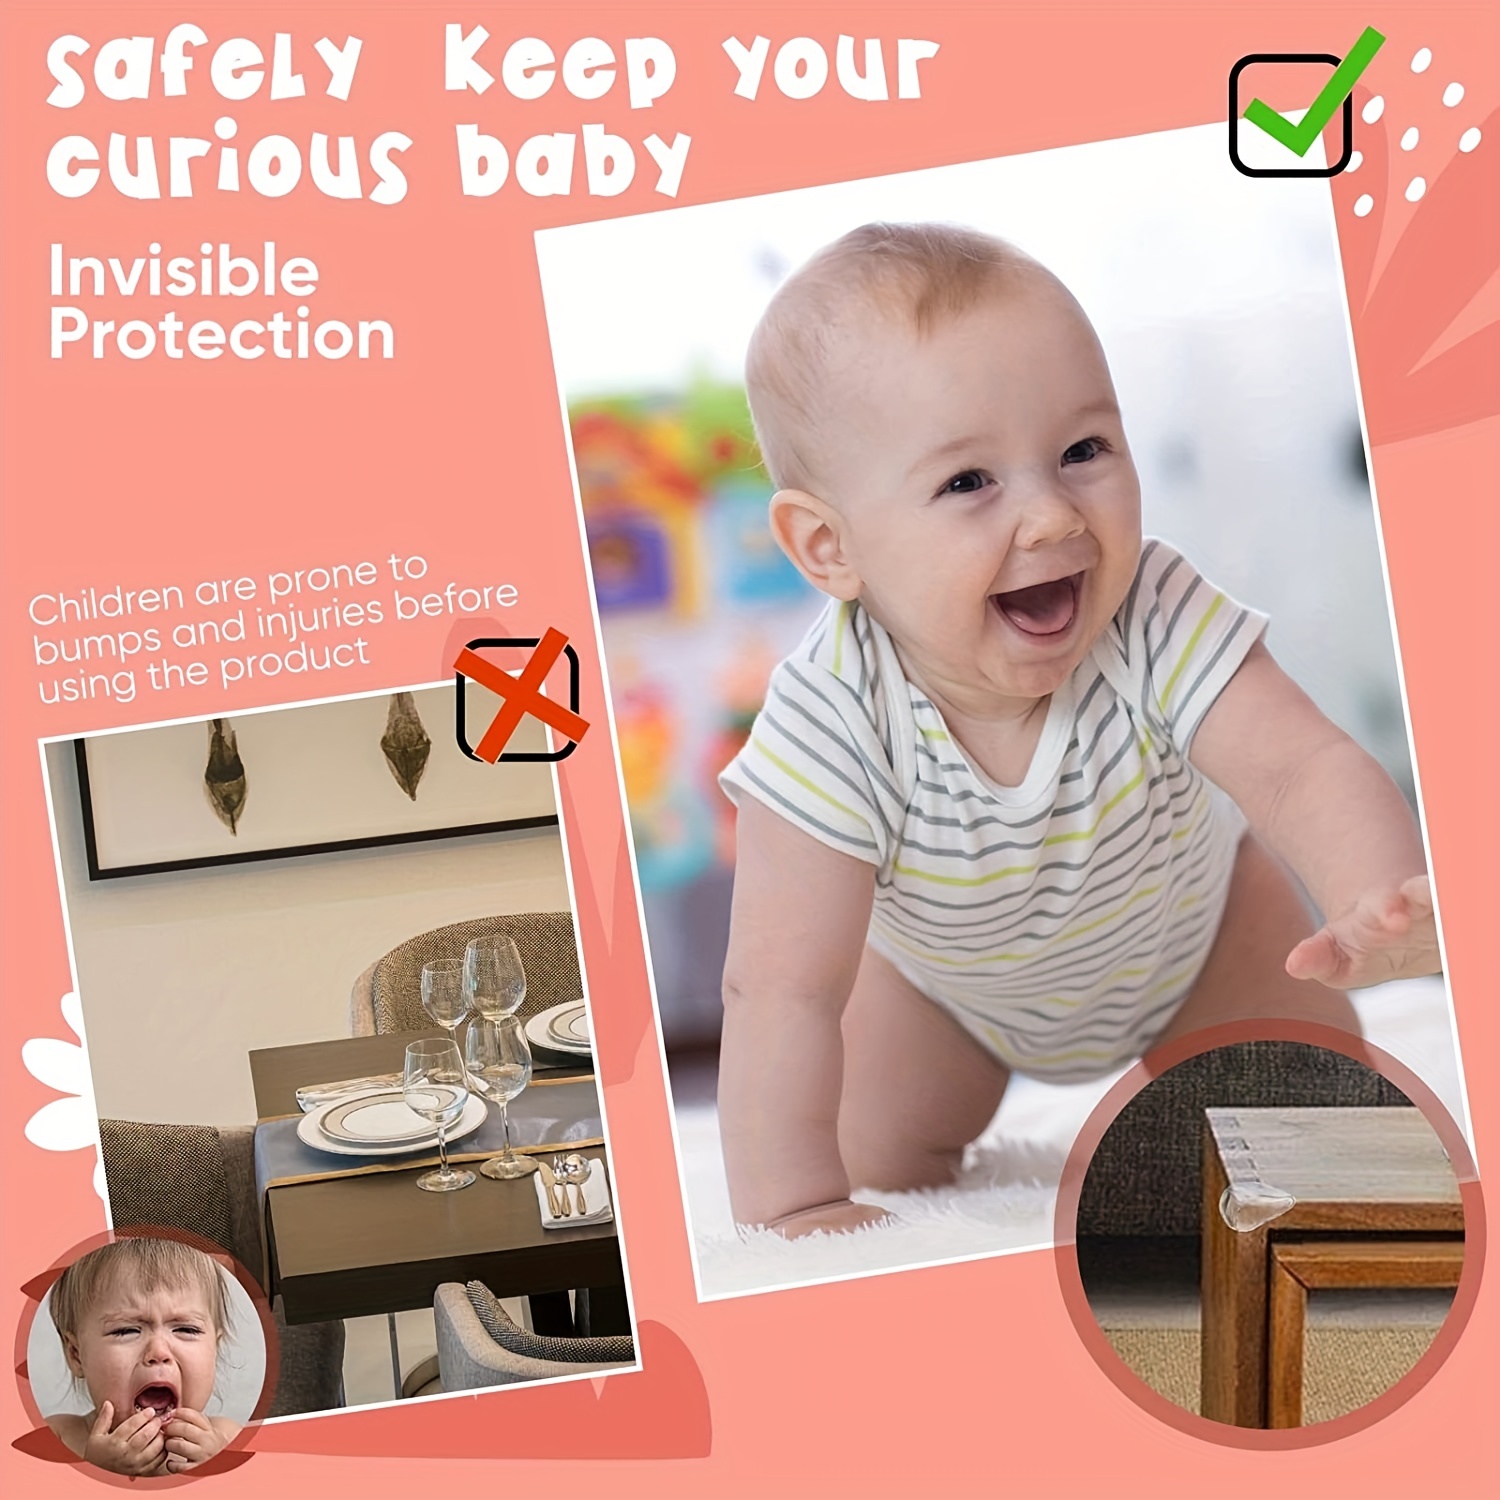 16PCS BABY SOFT SILICONE TABLE CORNER FURNITURE PROTECTOR GUARD EDGE SAFETY  BUMP